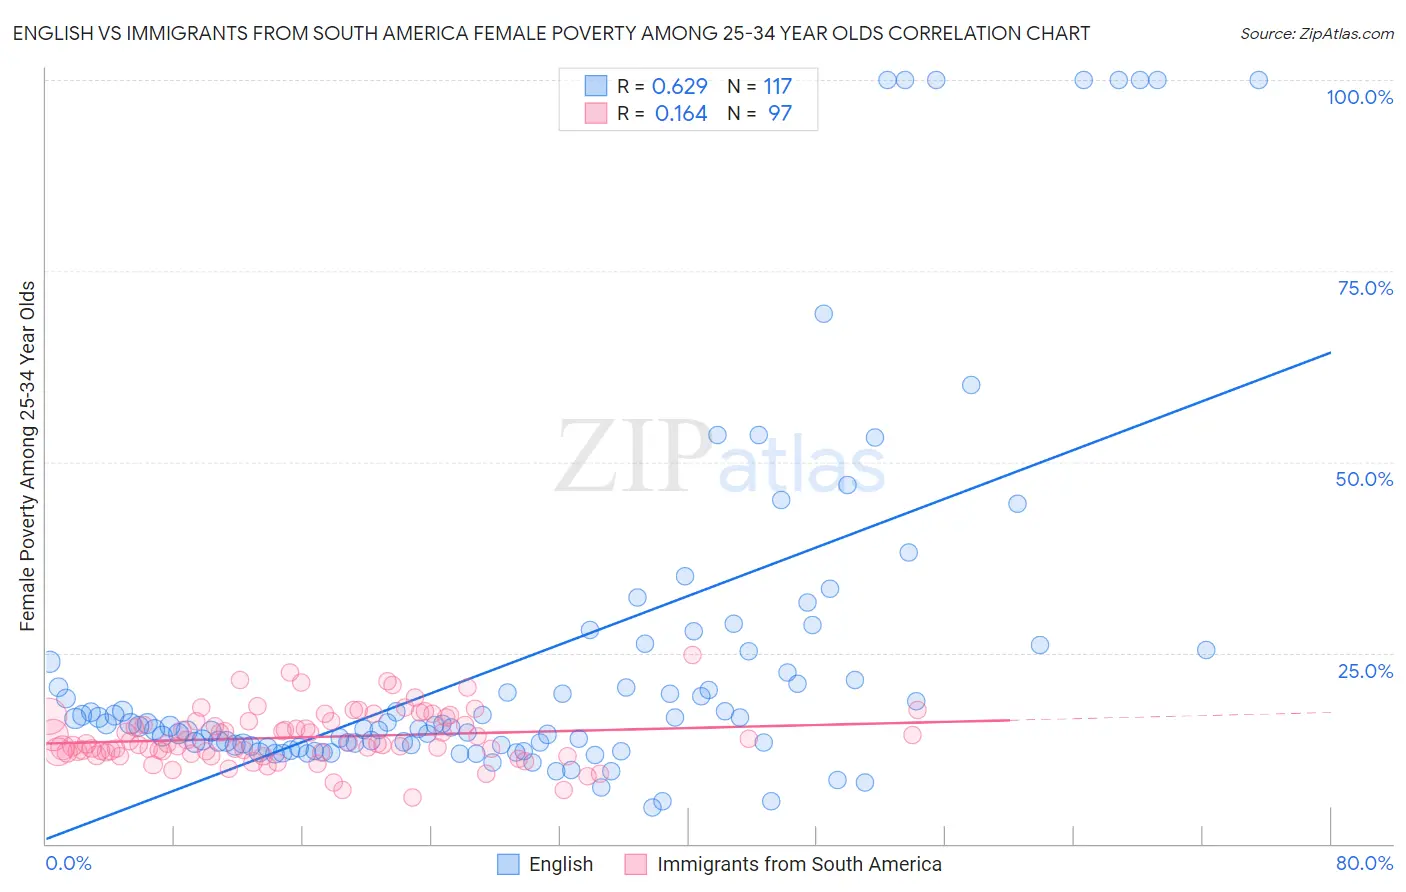 English vs Immigrants from South America Female Poverty Among 25-34 Year Olds